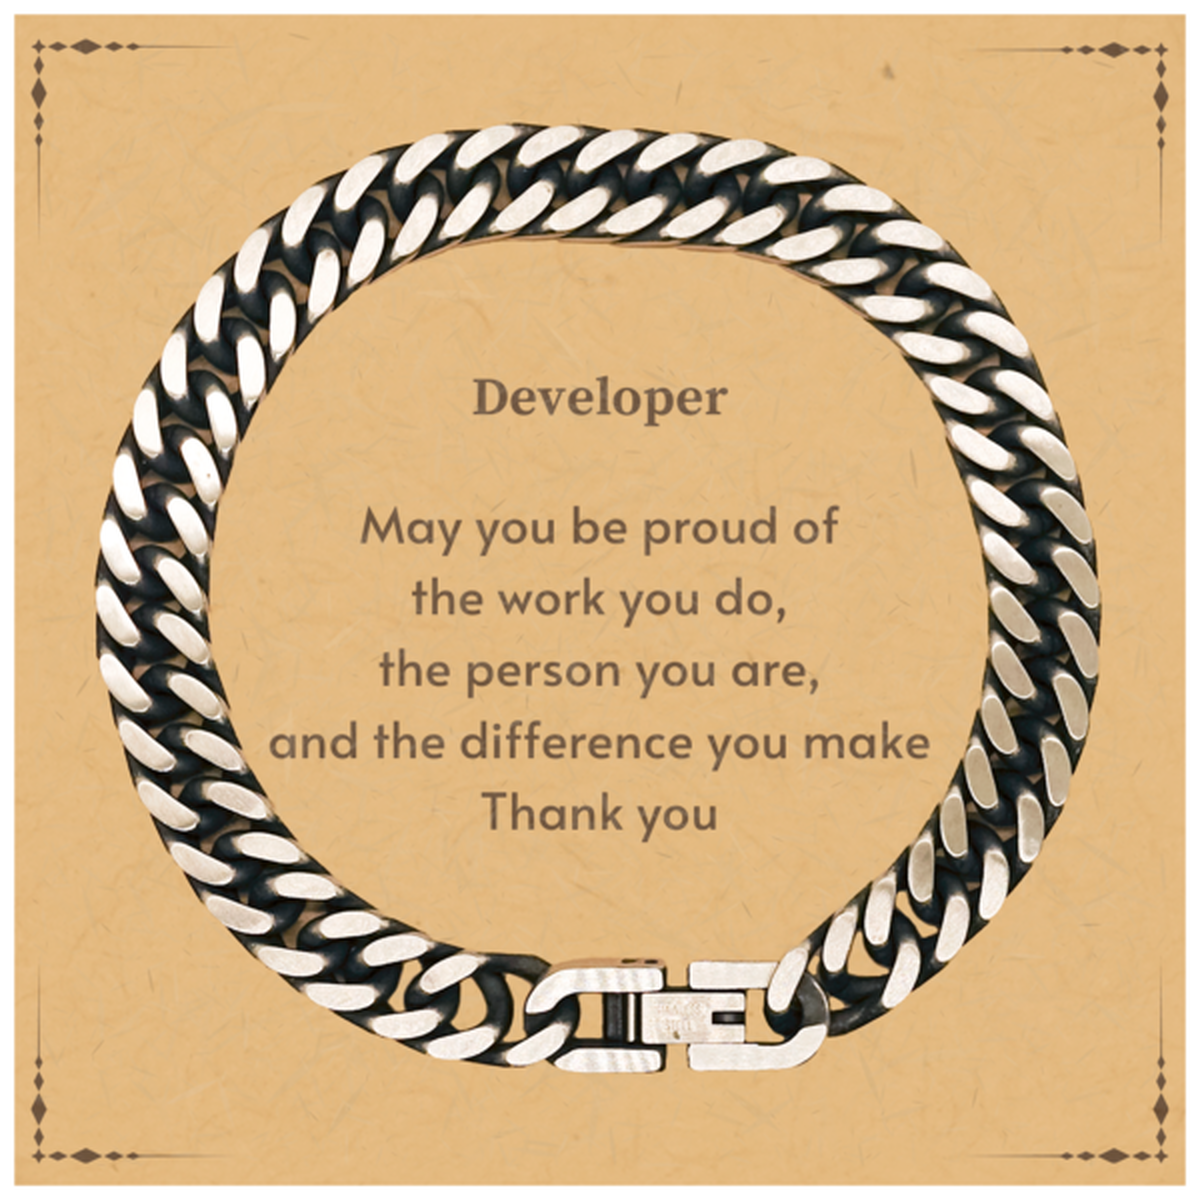 Heartwarming Cuban Link Chain Bracelet Retirement Coworkers Gifts for Developer, Developer May You be proud of the work you do, the person you are Gifts for Boss Men Women Friends